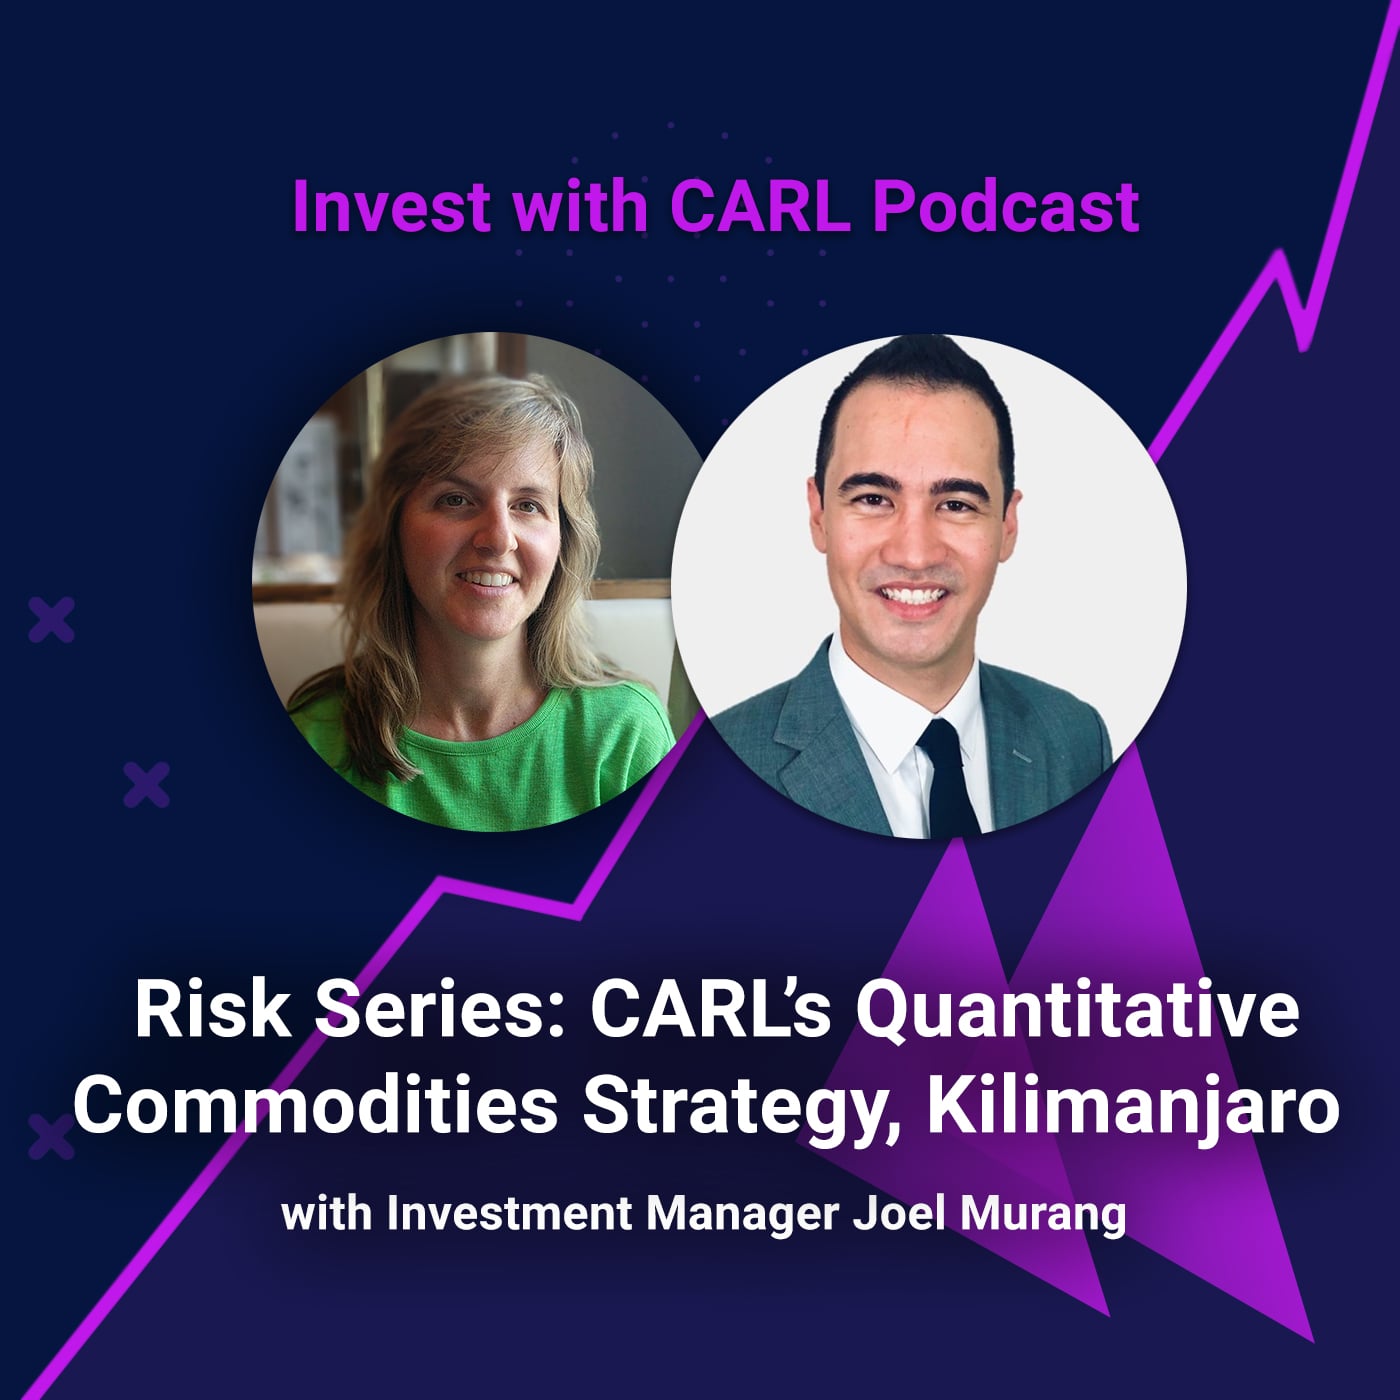 Risk Series - Risk Management with Quantitative Commodities Strategy, Kilimanjaro